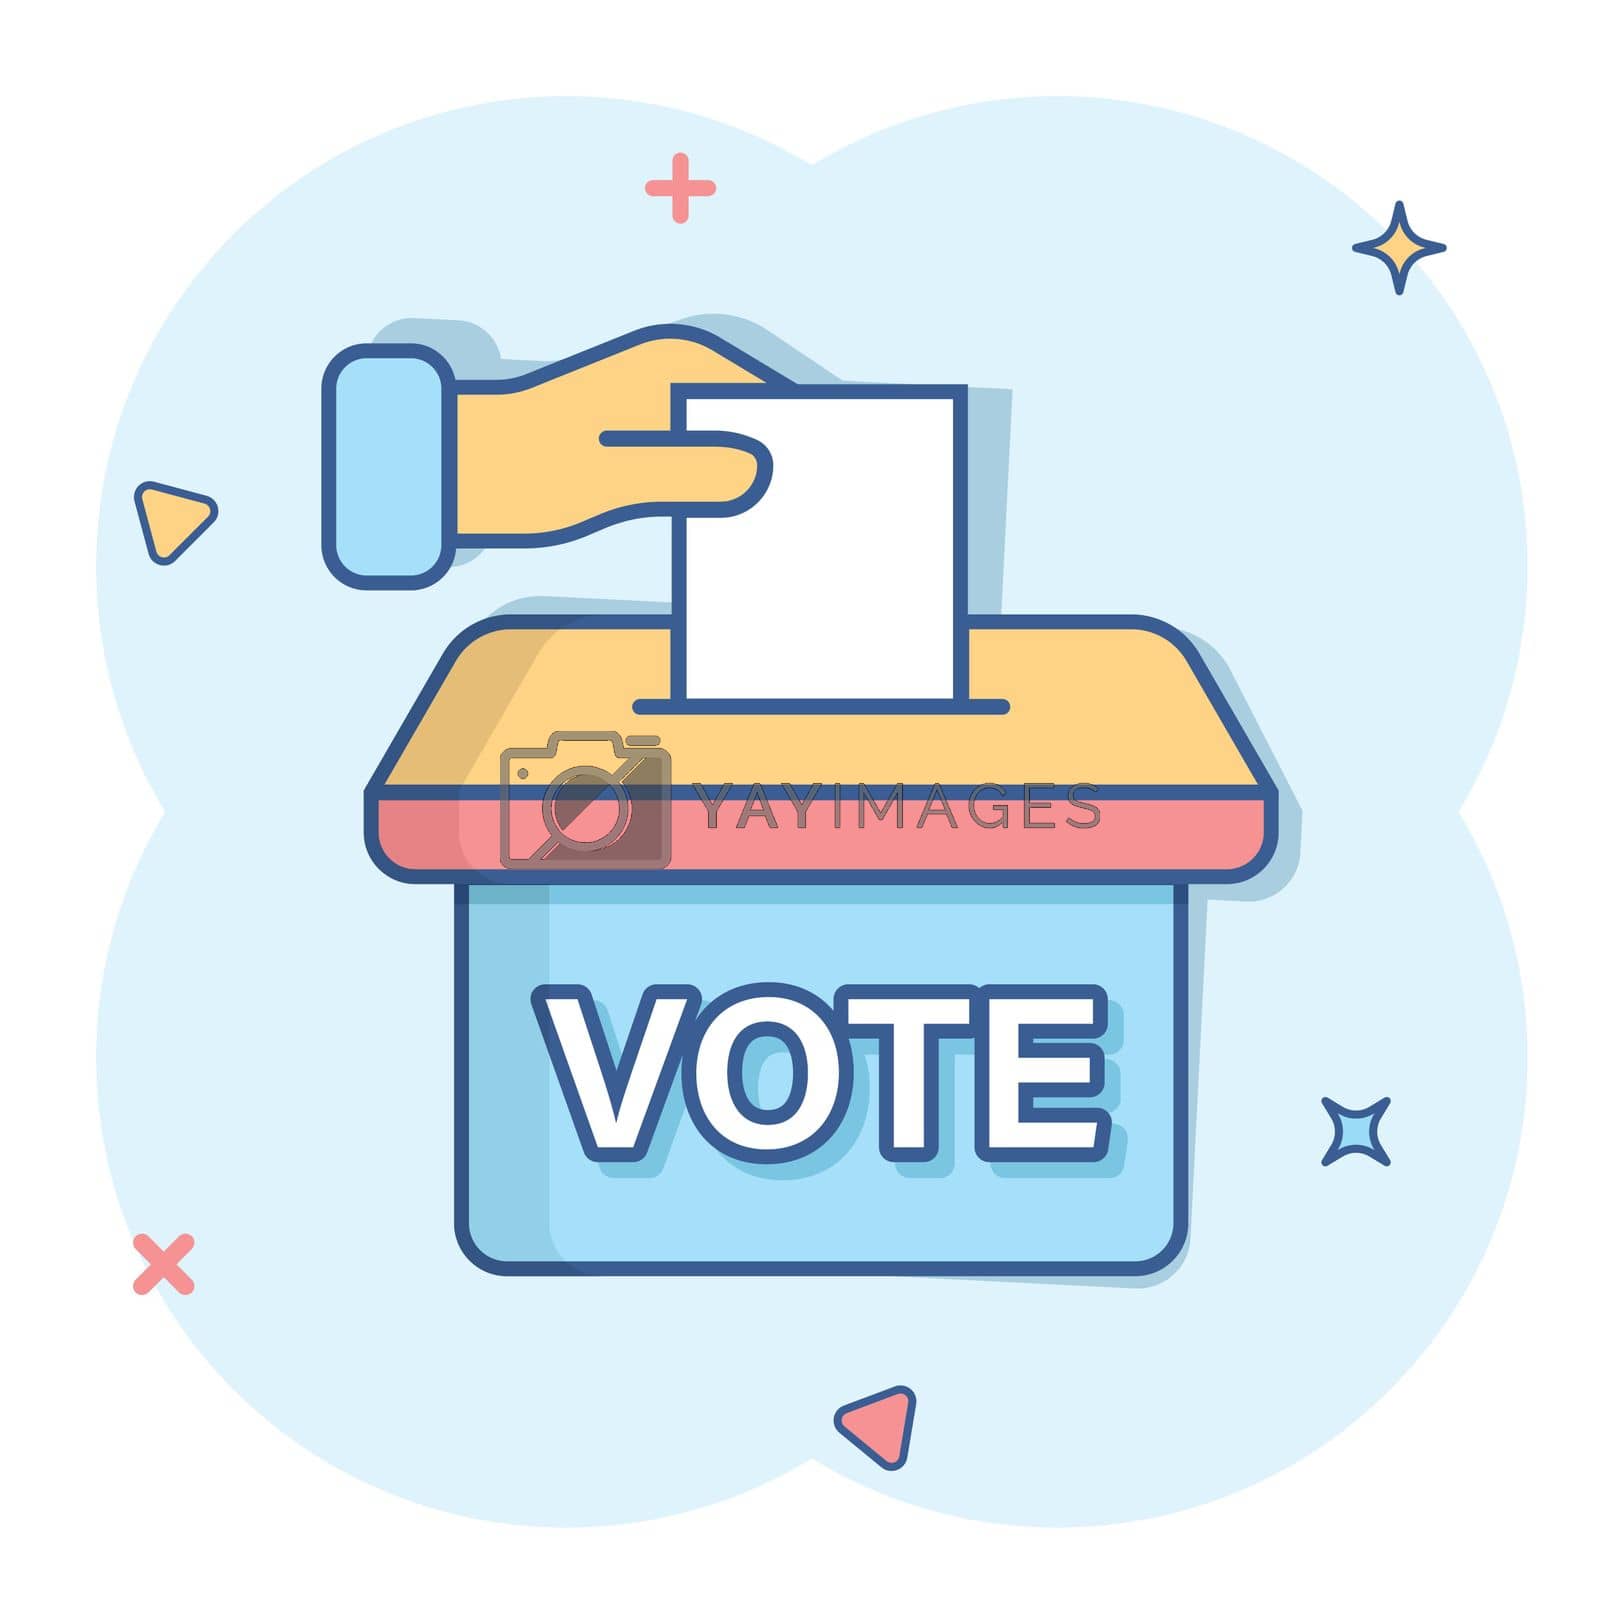 Royalty free image of Vote icon in comic style. Ballot box cartoon vector illustration on white isolated background. Election splash effect business concept. by LysenkoA